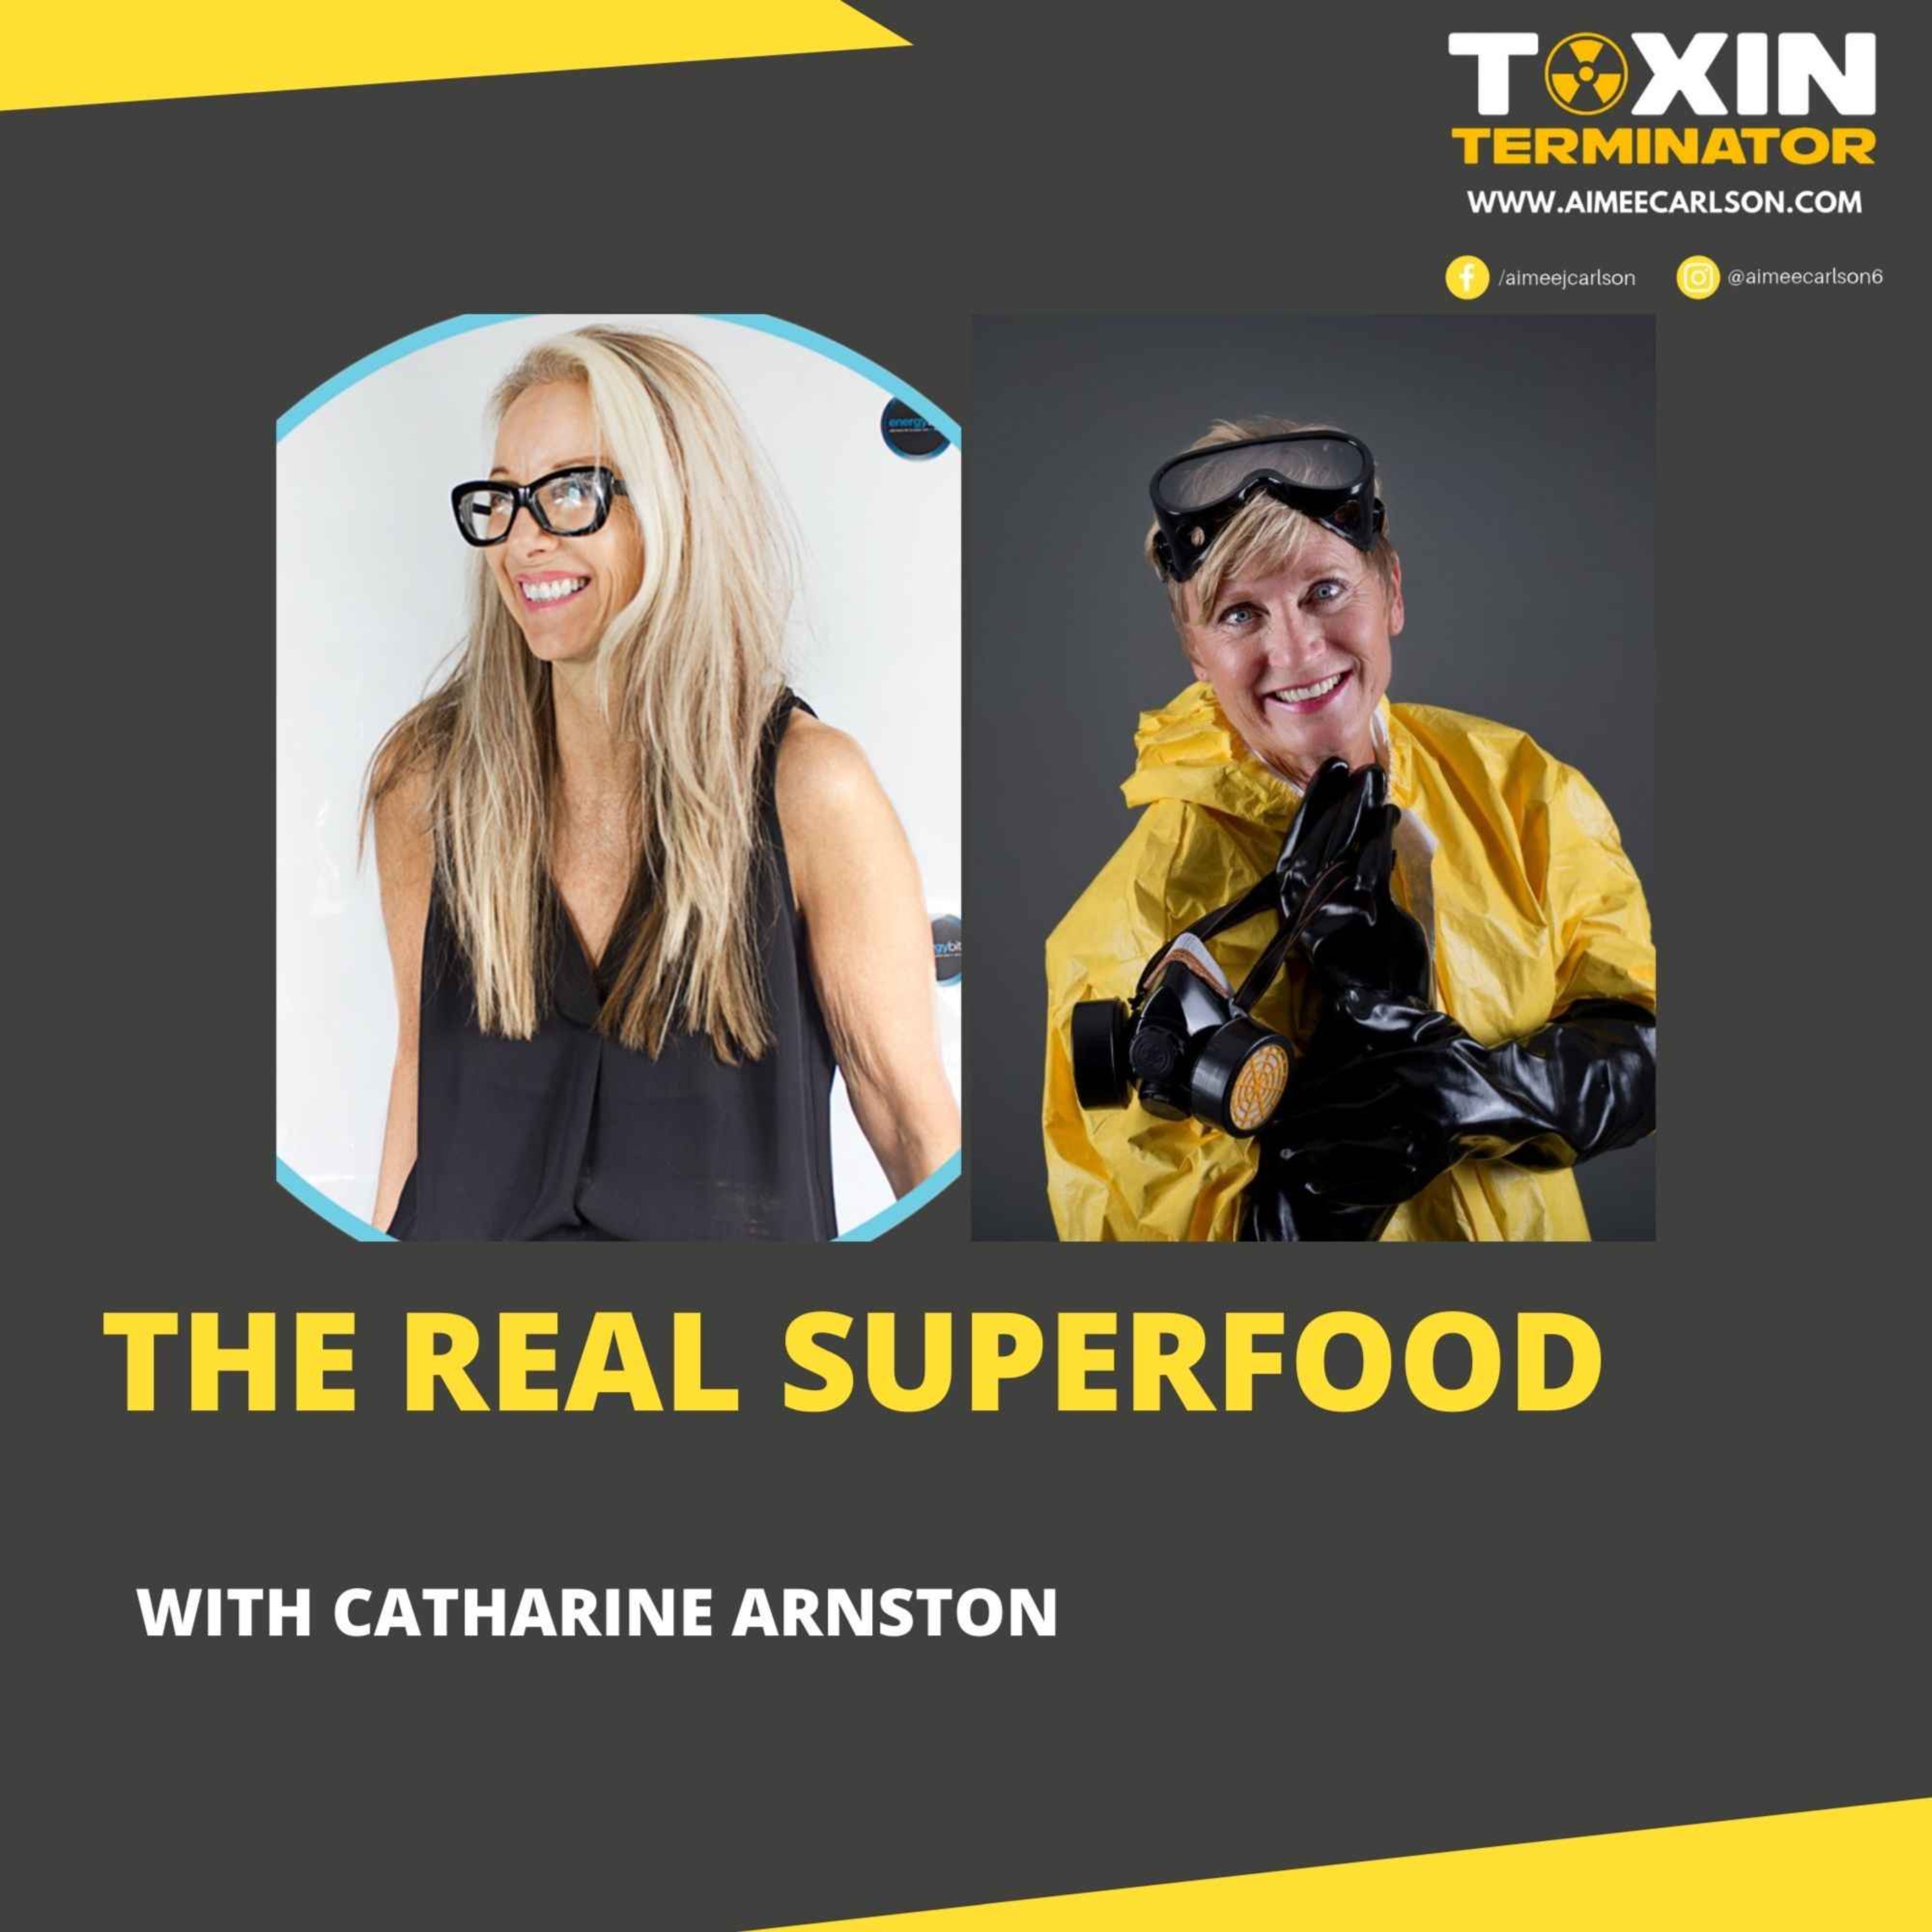 The REAL Superfood with Catharine Arnston